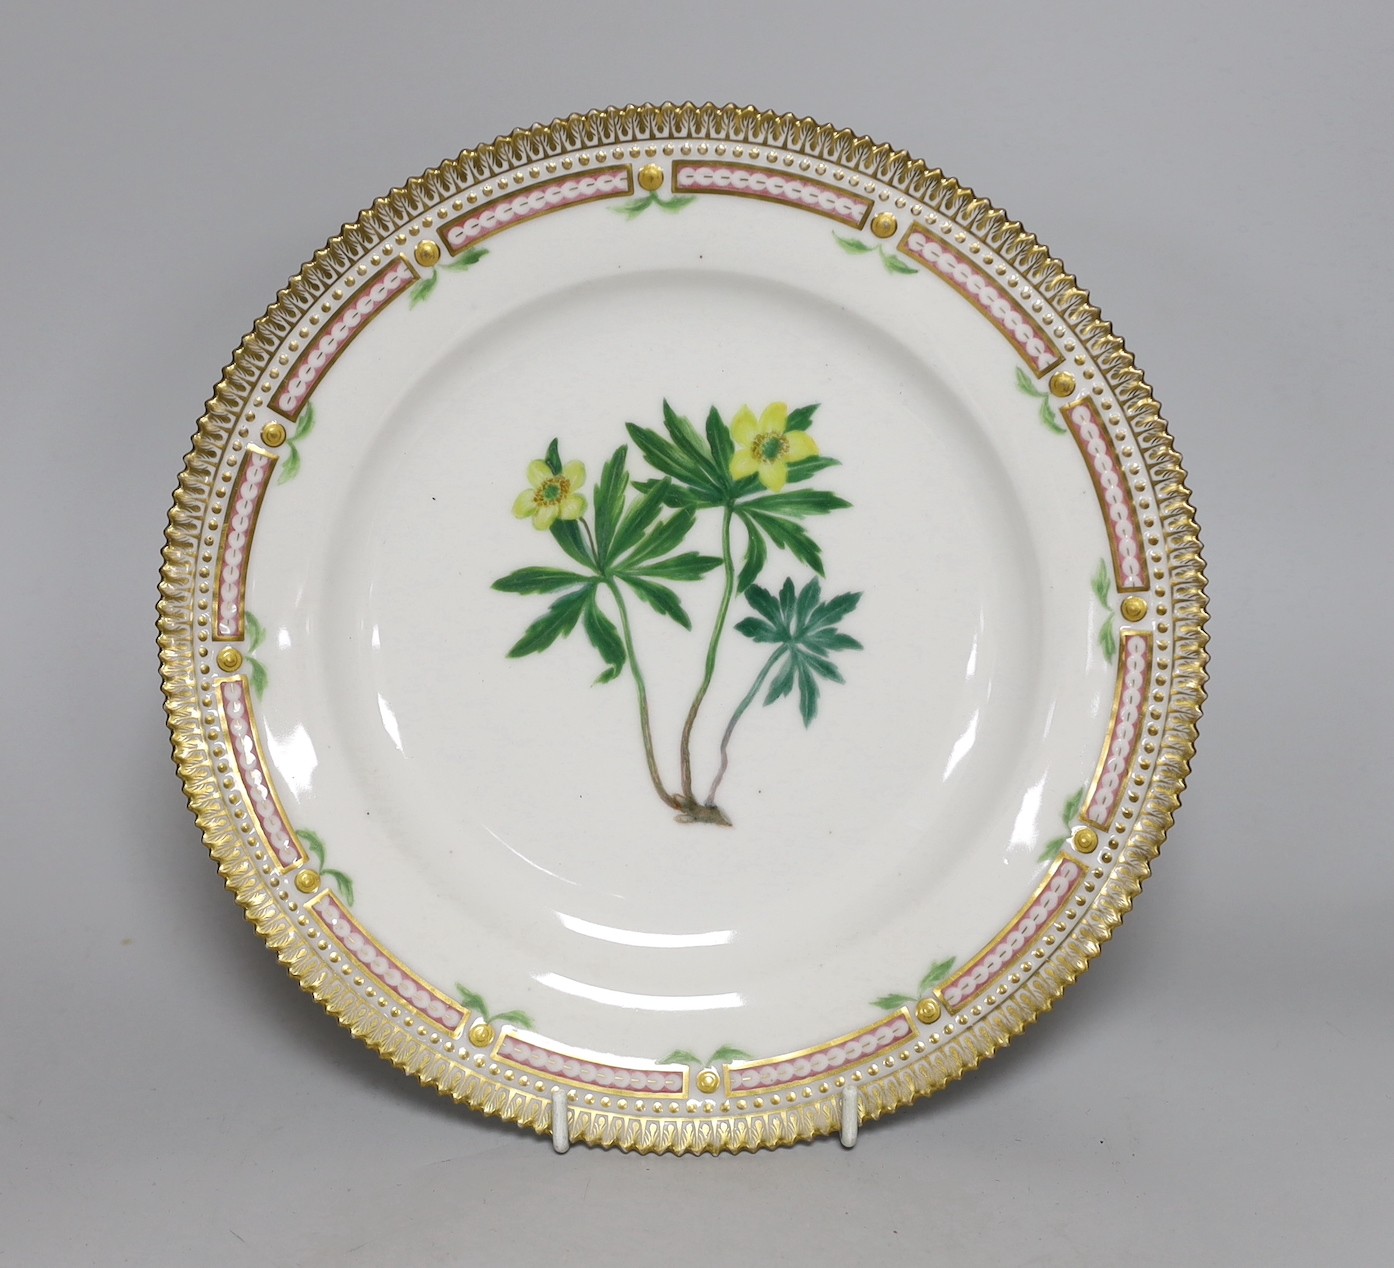 A Royal Copenhagen Flora Danica plate painted with Anemone, titled. 25cm